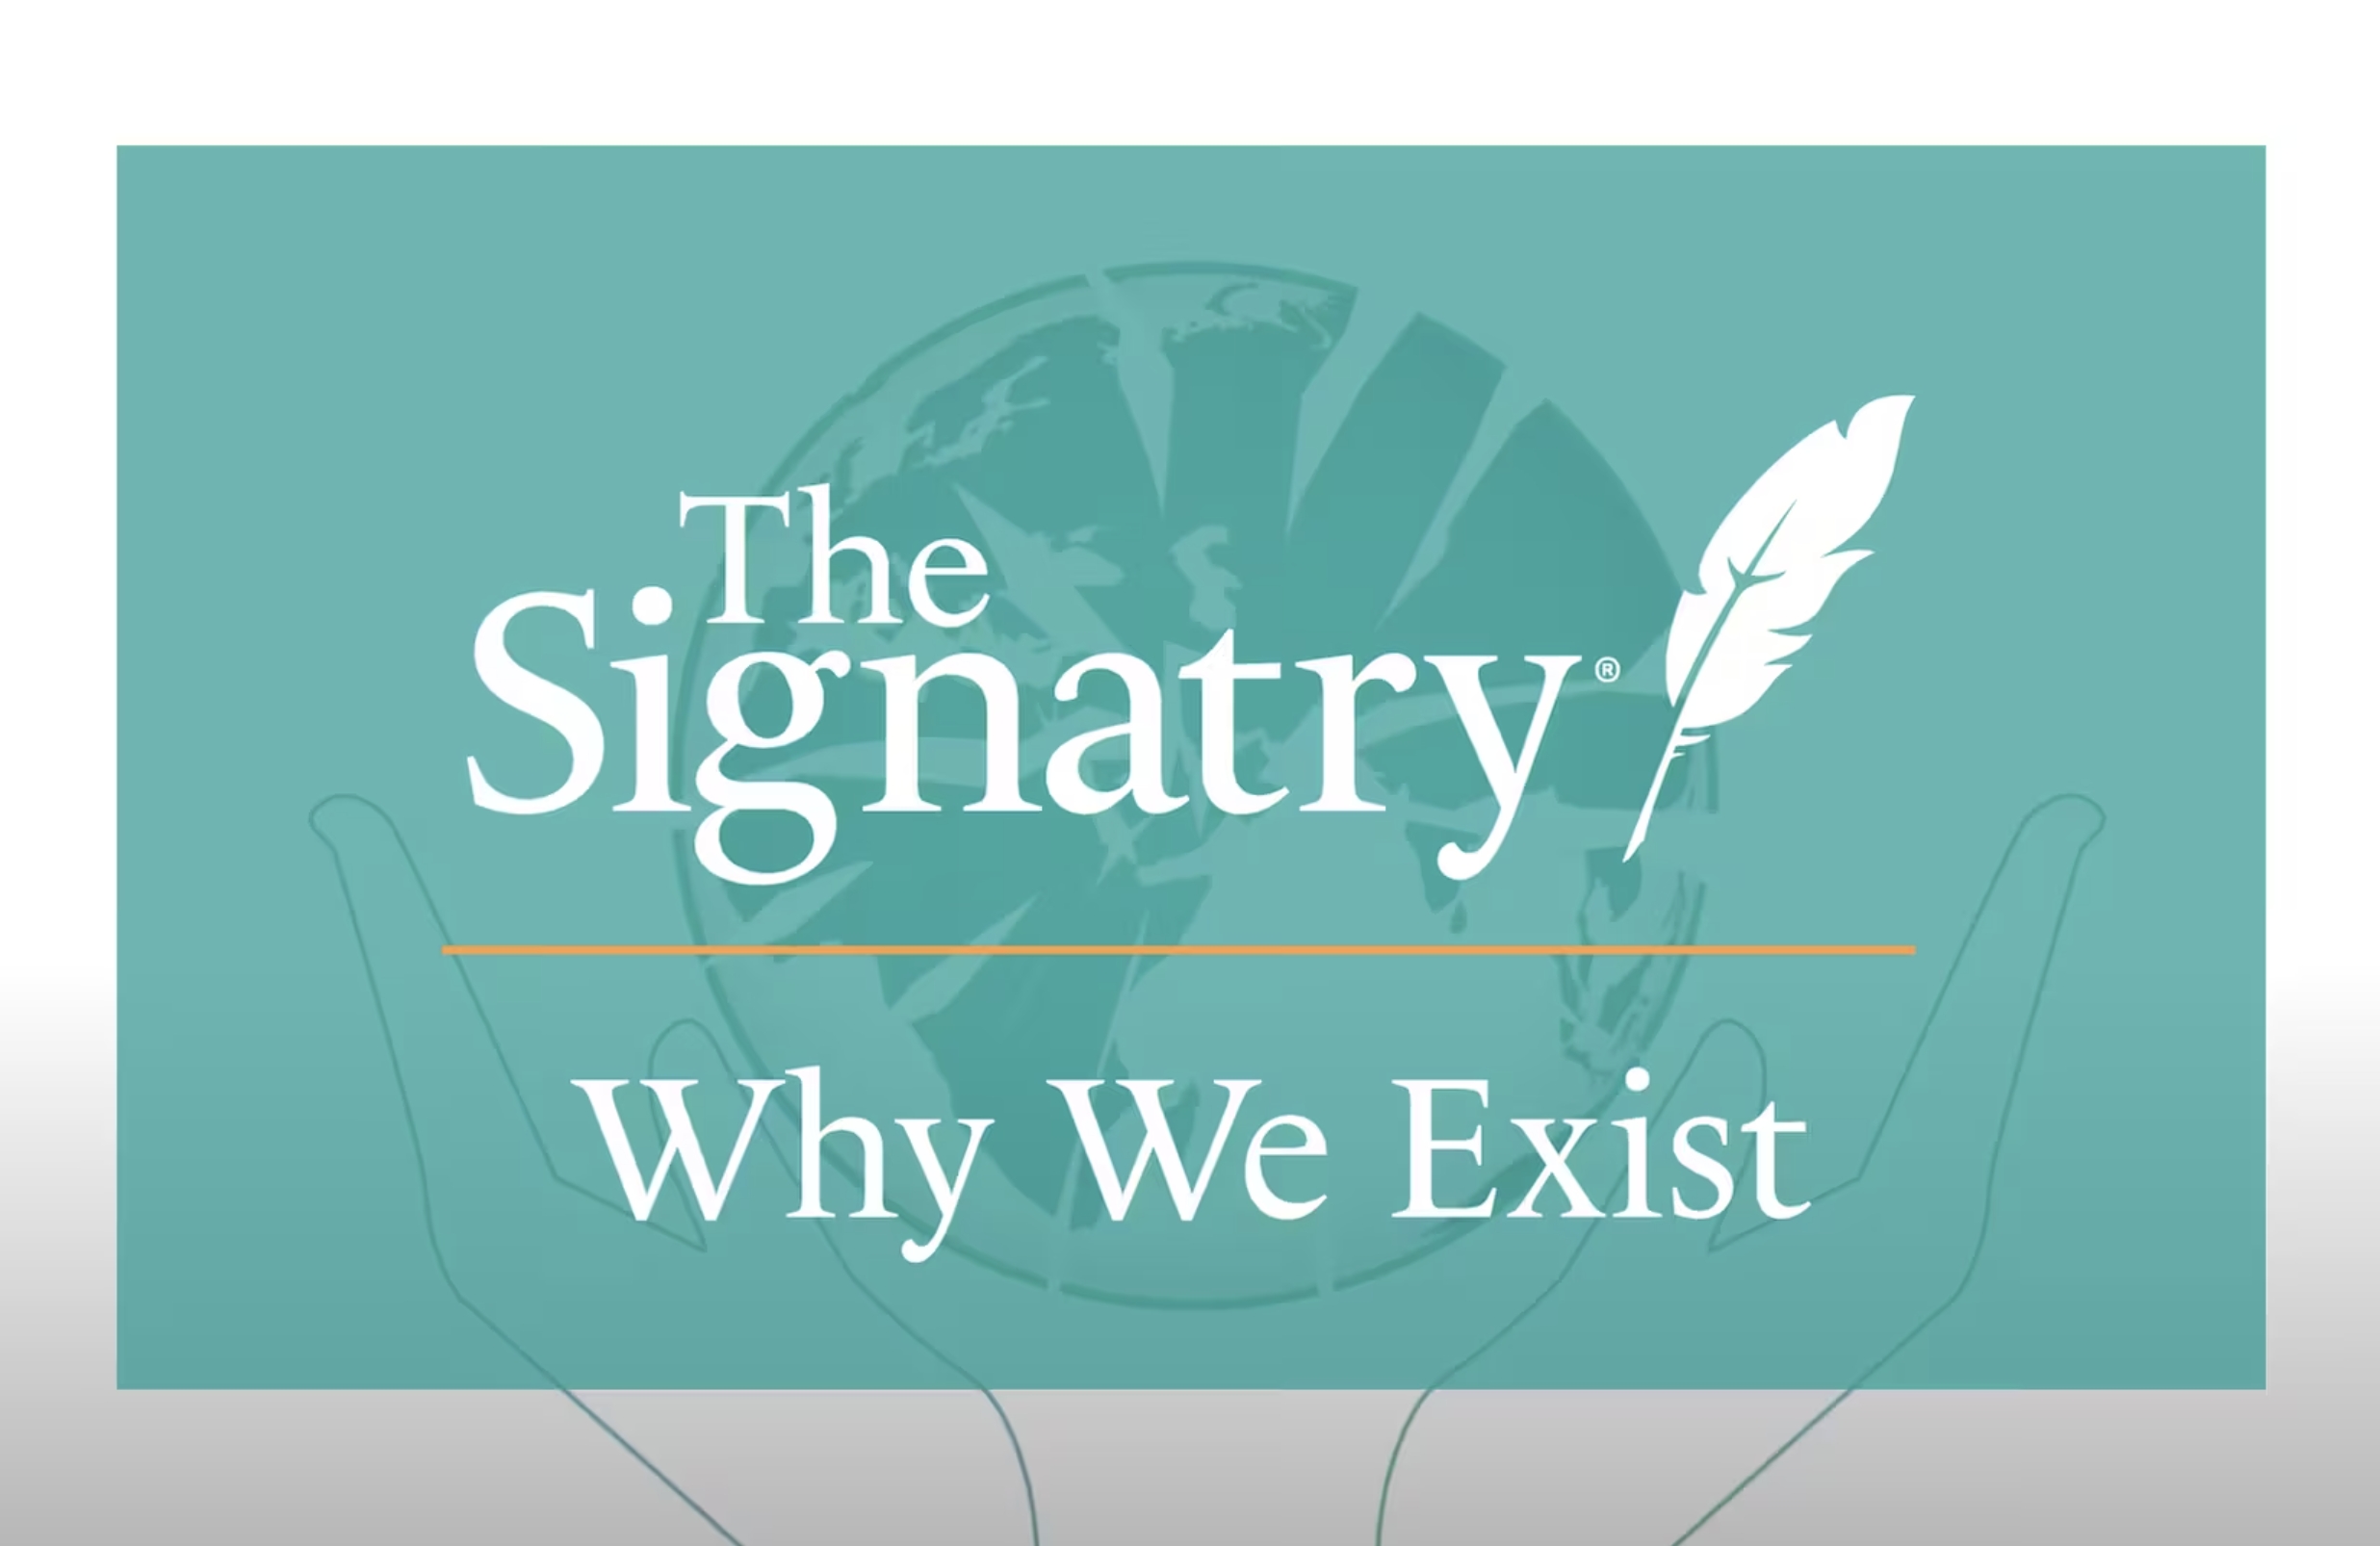 The words "Why We Exist" and the logo of The Signatry overlayed on a globe held between two hands